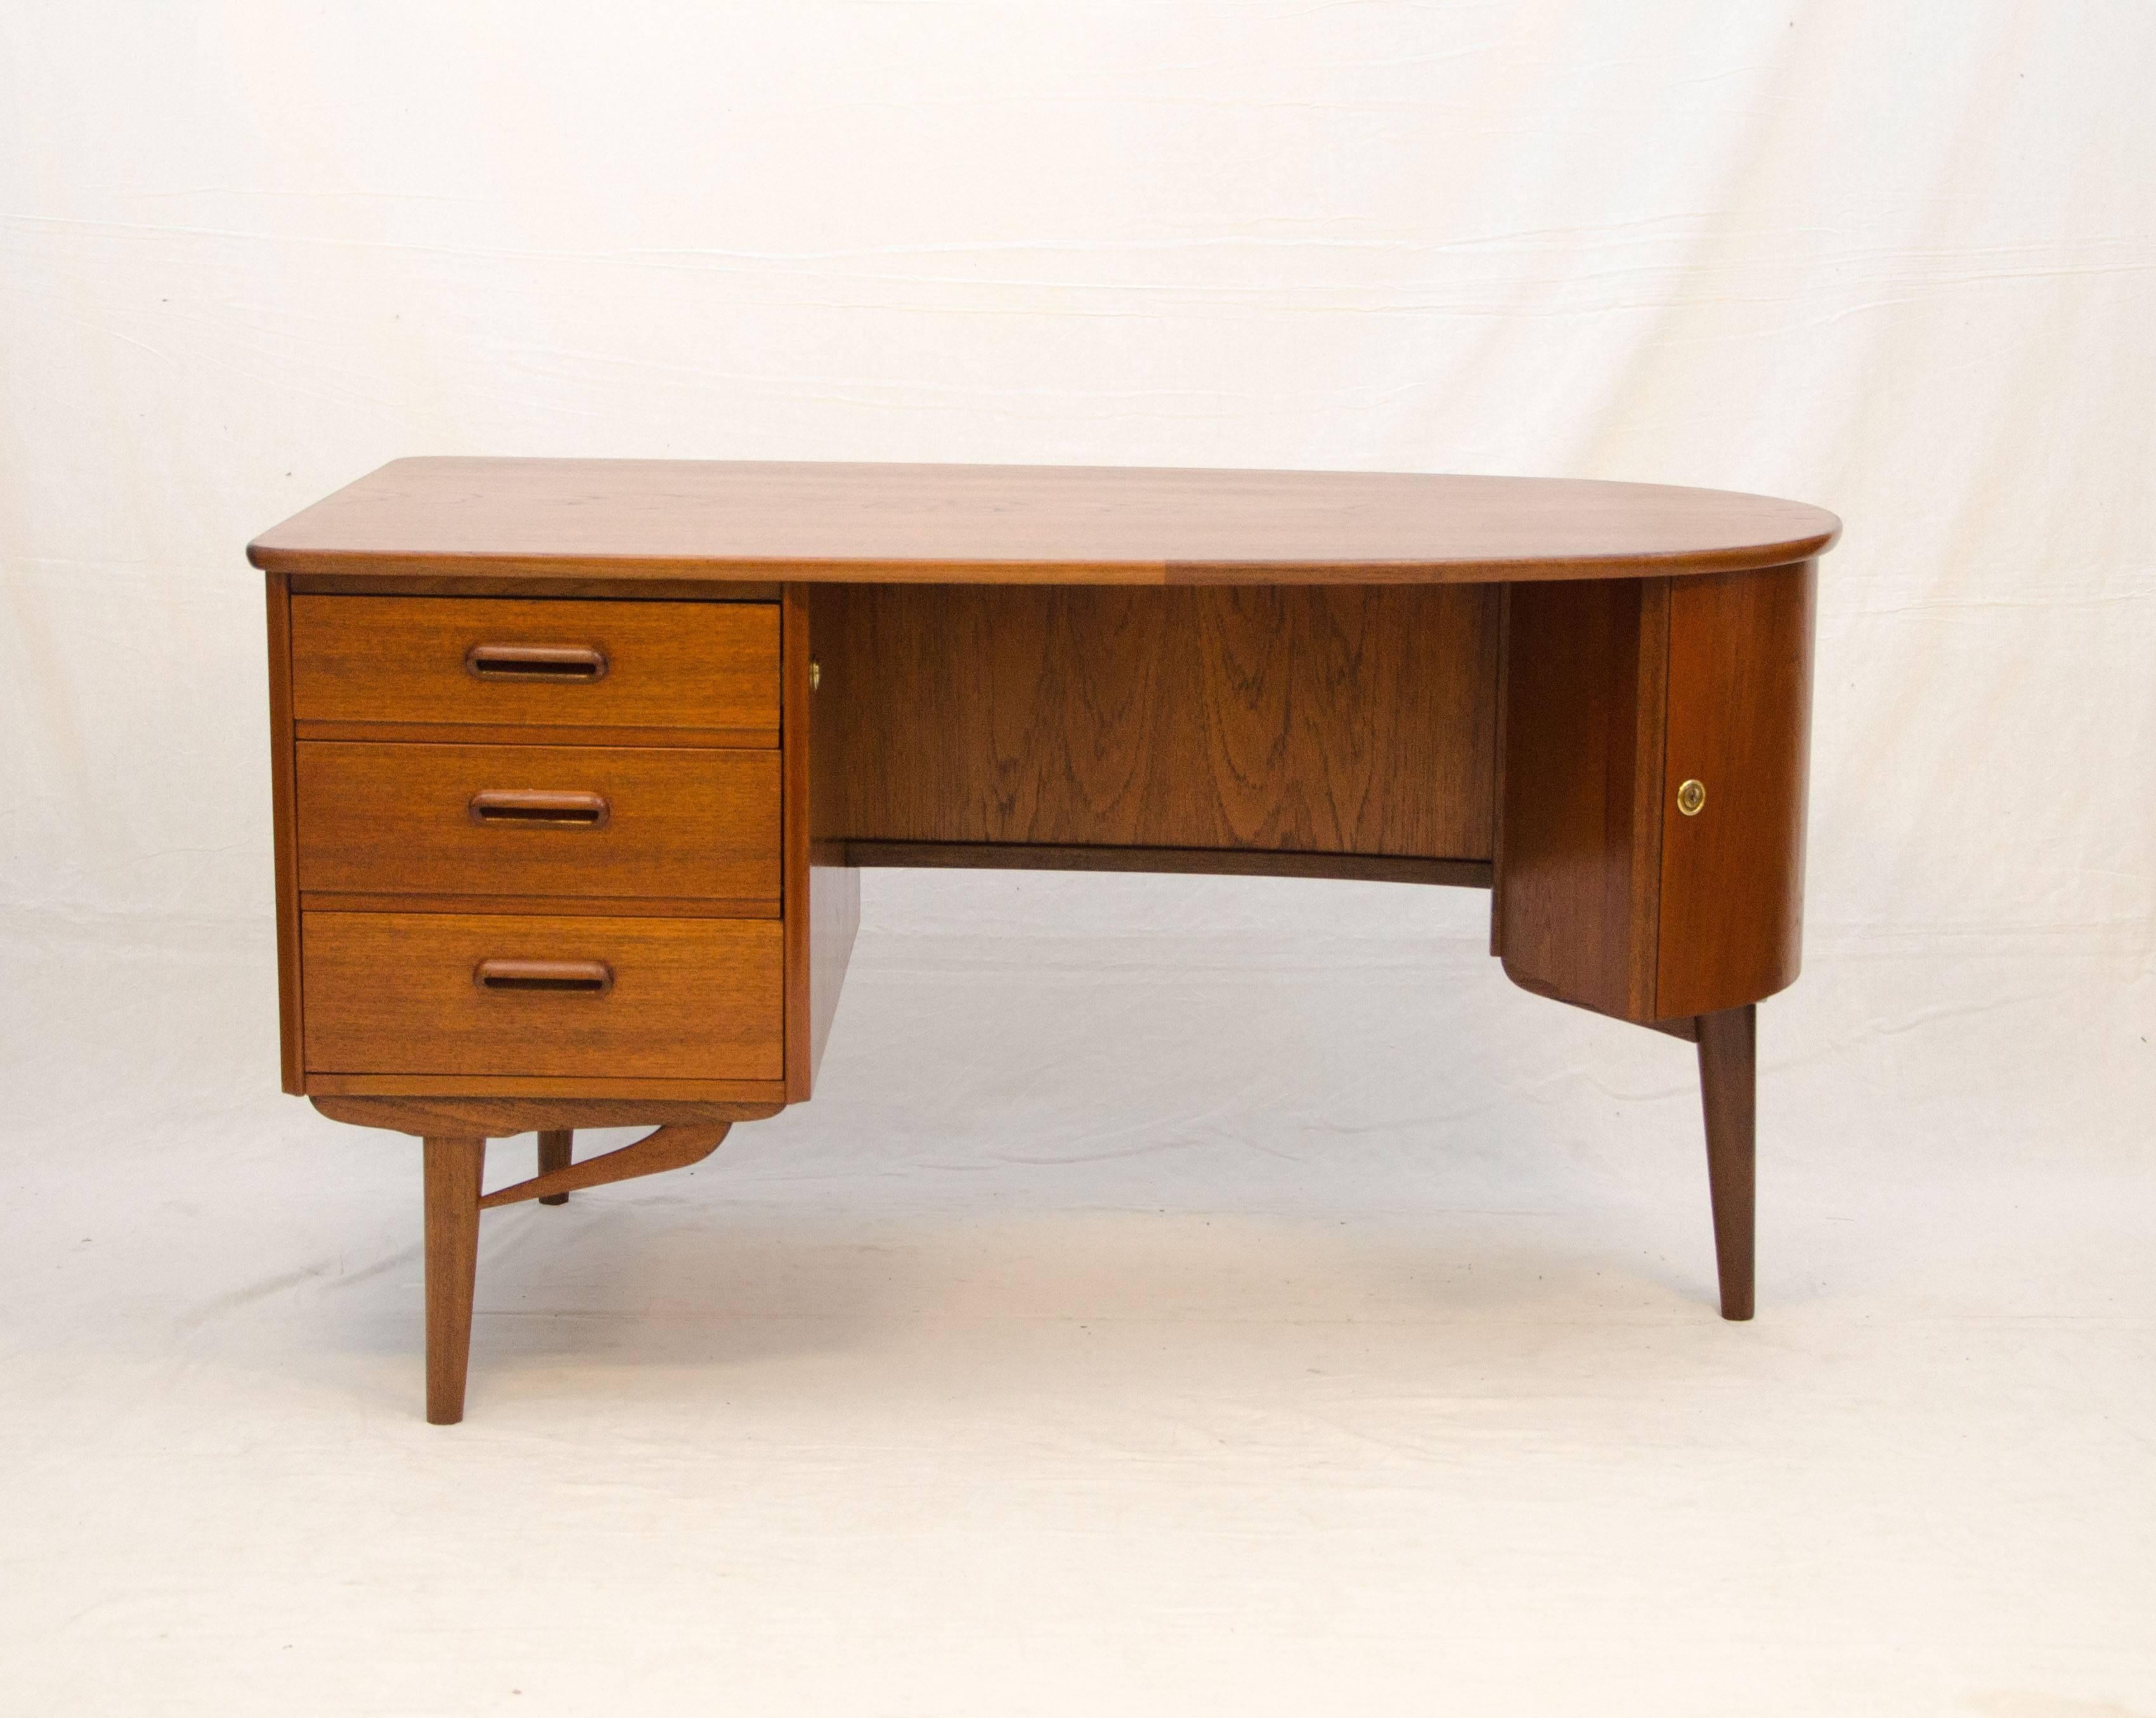 Nice medium size Danish Mid-Century Modern teak desk with an elliptical top and several features. There is a set of storage drawers on the left side and a curved storage cabinet with a small shelf on the right side. At the back there is a bookshelf